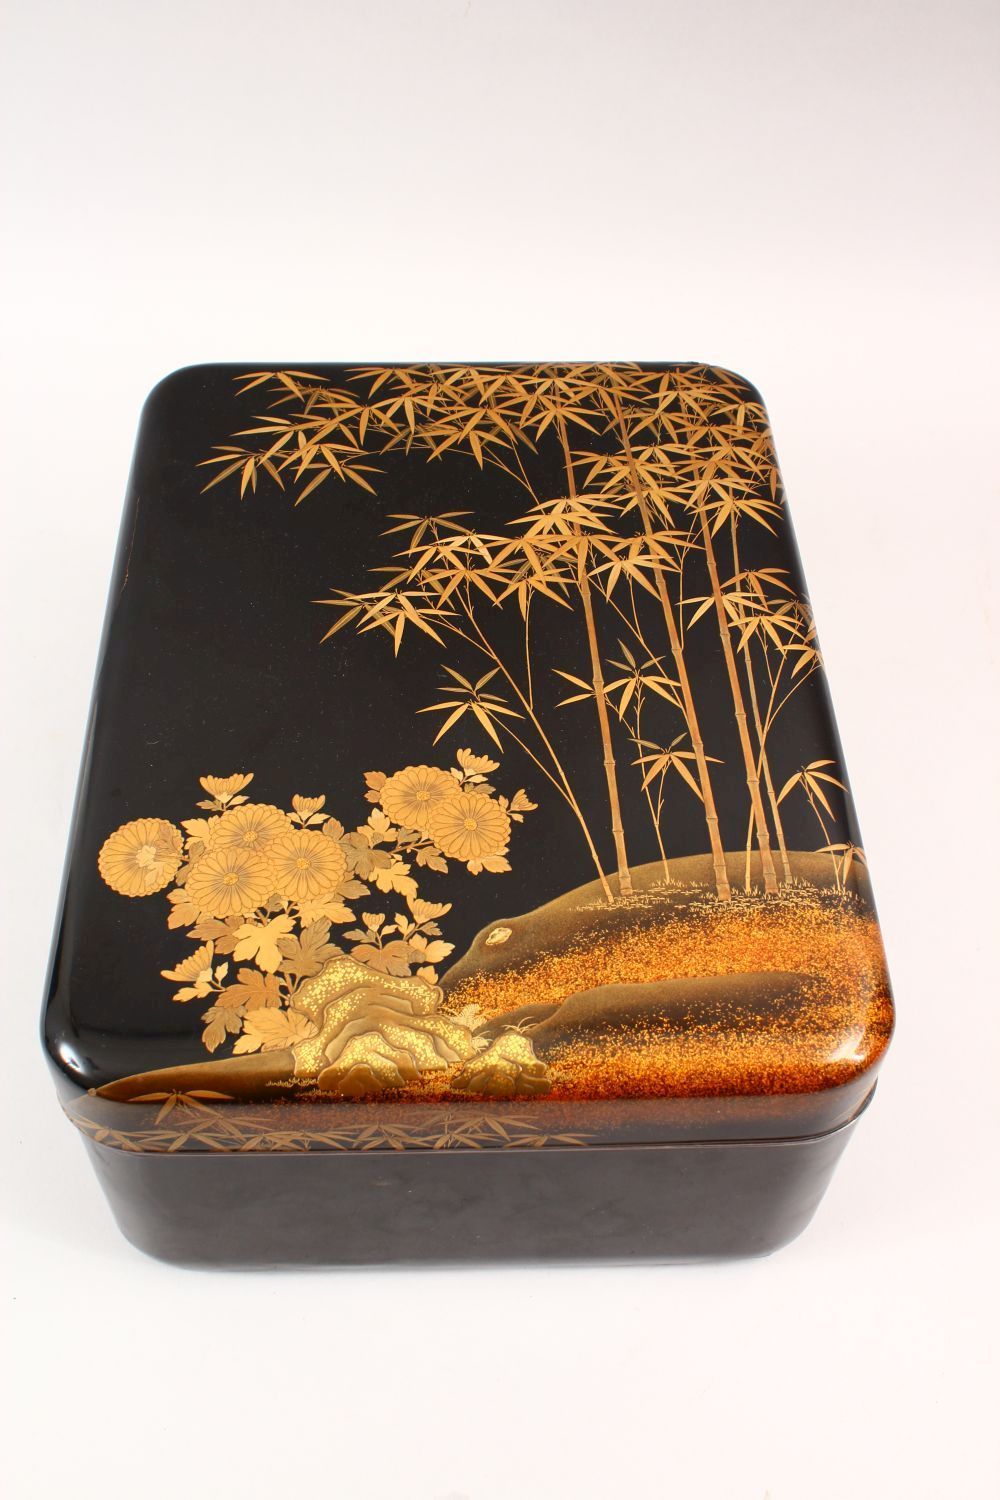 A GOOD JAPANESE MEIJI PERIOD LACQUER & GILT DECORATED LIDDED BOX the box decorated with gold lacquer - Image 2 of 6